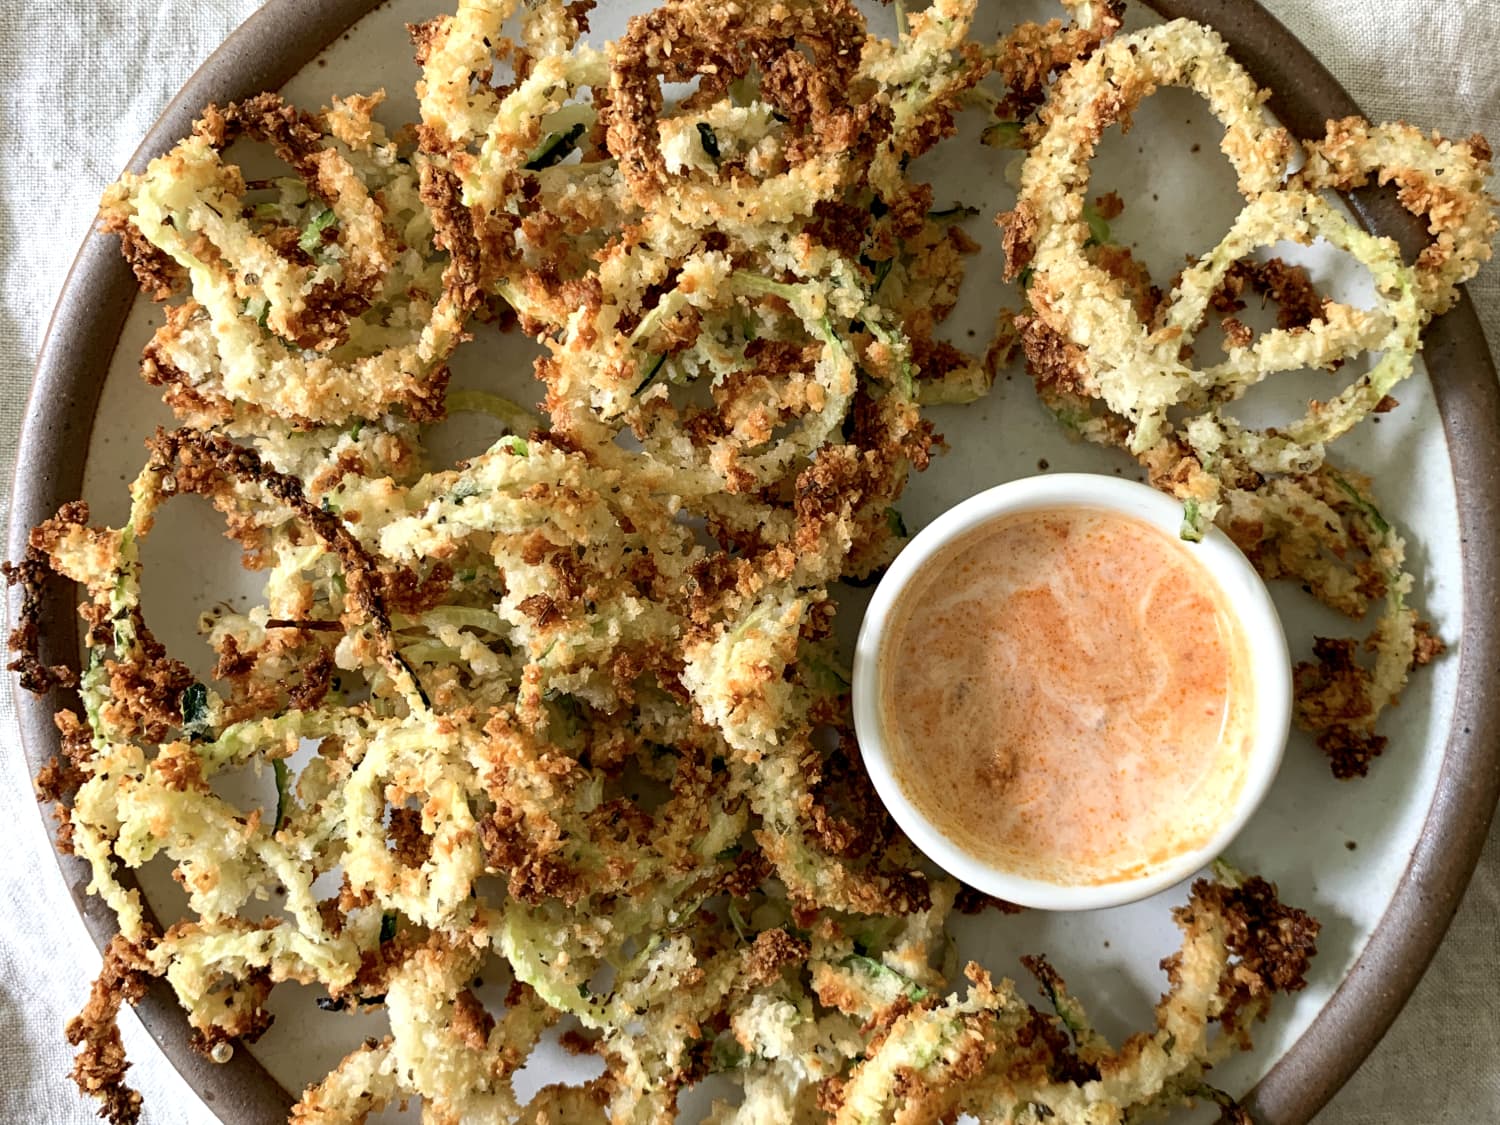 https://cdn.apartmenttherapy.info/image/upload/f_jpg,q_auto:eco,c_fill,g_auto,w_1500,ar_4:3/k%2FEdit%2F05-2021-I-Tried-It-Eating-Well-Zucchini-Fries%2FFinals%2FIMG_4475-final